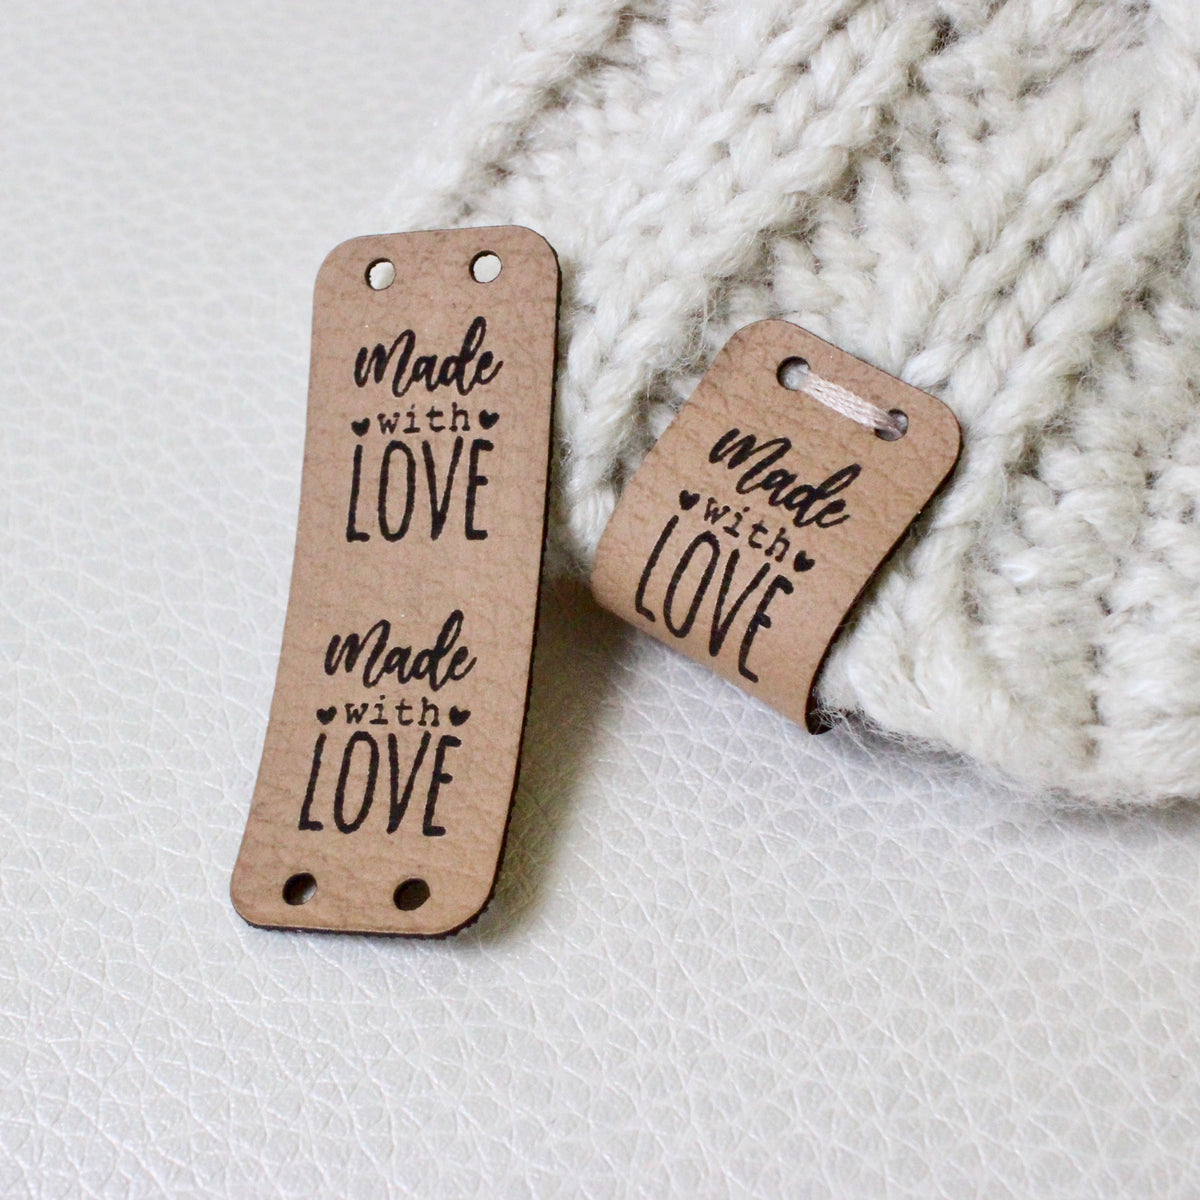 Leather Tags Handmade With Love Labels Sewing Craft Hand Made Tags for  Clothes Bags Shoes Knitting Tags Lables Faux Leather Tag Label 